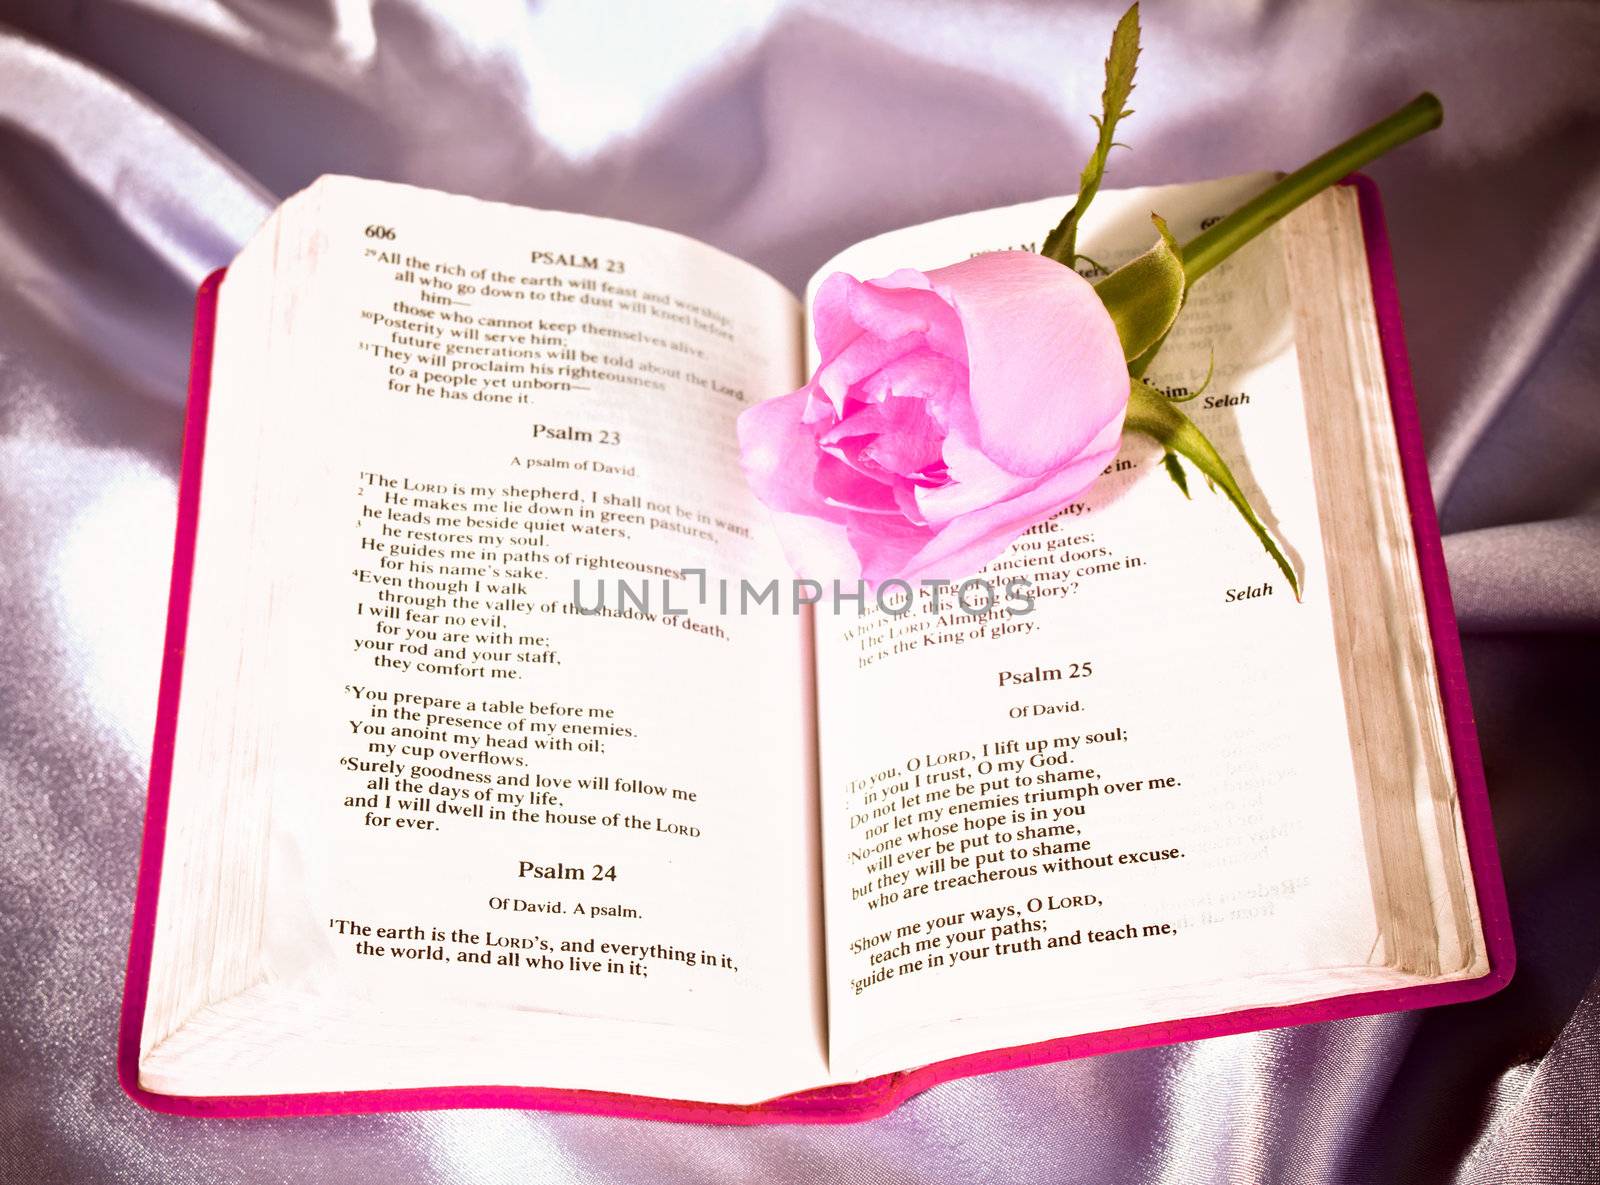 A pale pink rosebud lying on a bible open to psalms